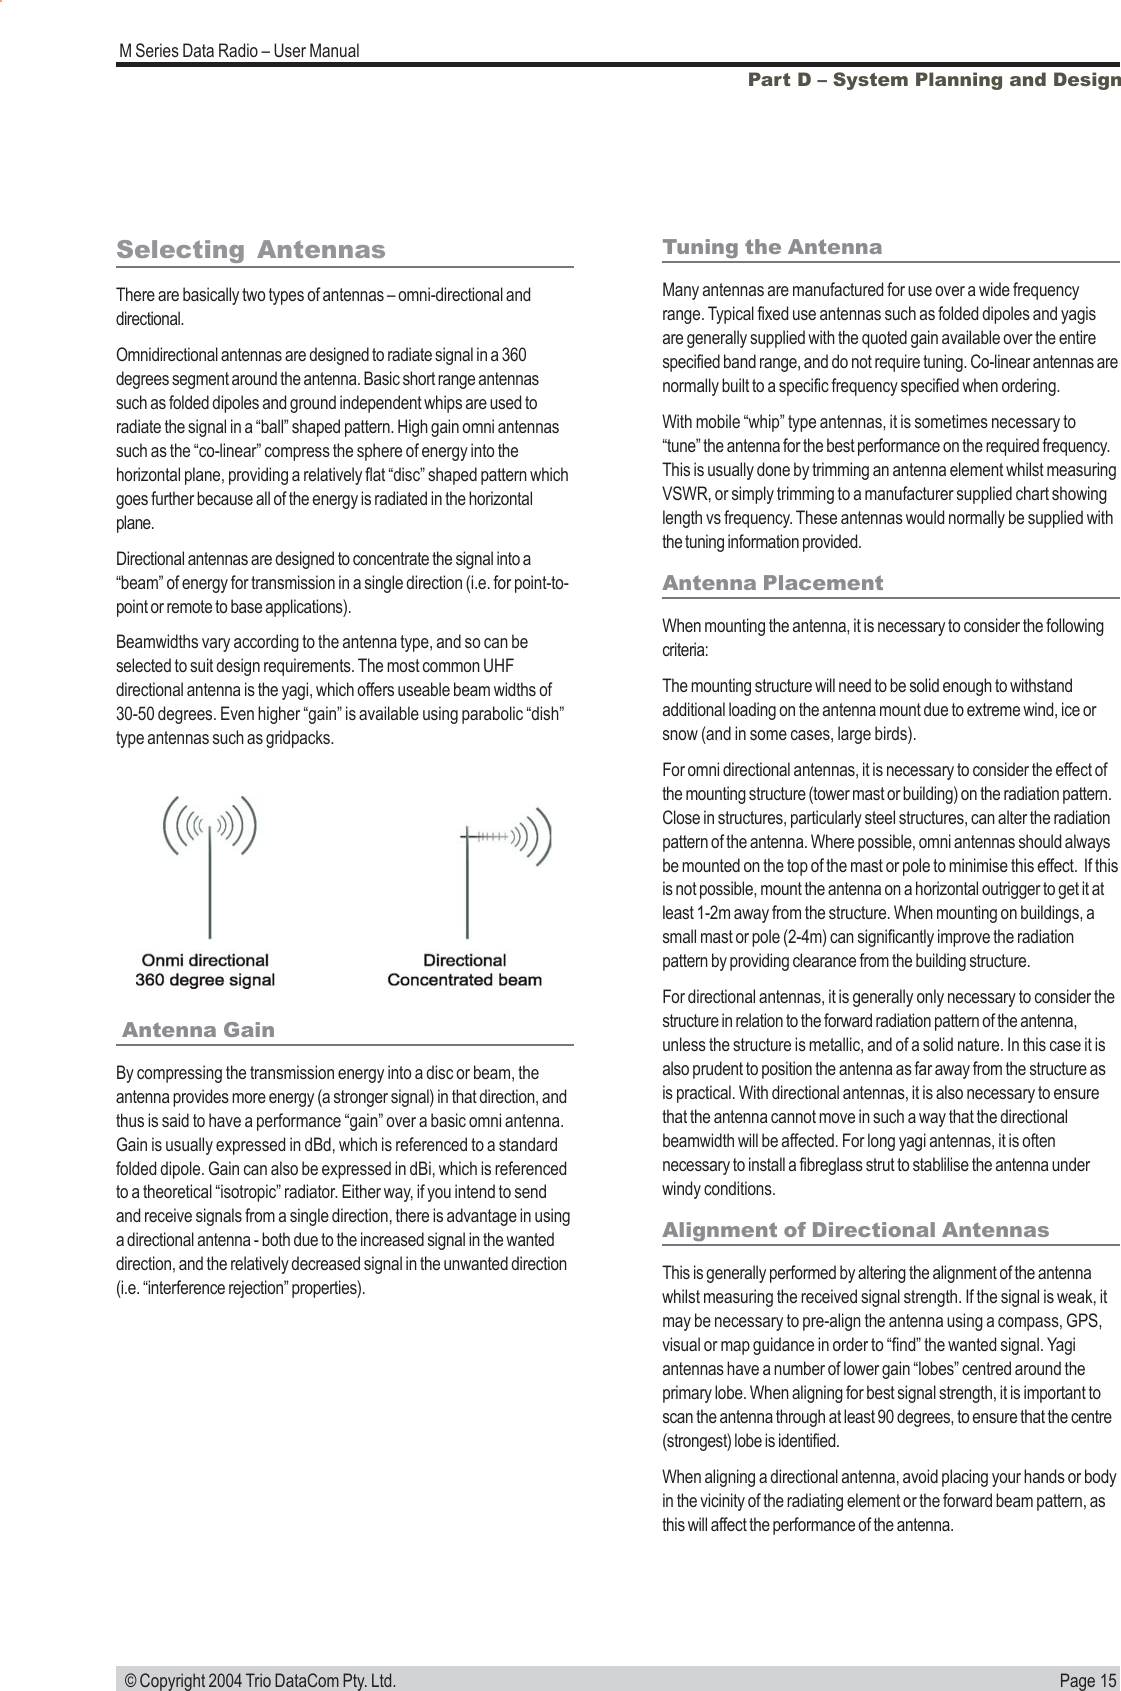 Page 15M Series Data Radio – User Manual © Copyright 2004 Trio DataCom Pty. Ltd.Part D – System Planning and Design Antenna GainBy compressing the transmission energy into a disc or beam, theantenna provides more energy (a stronger signal) in that direction, andthus is said to have a performance “gain” over a basic omni antenna.Gain is usually expressed in dBd, which is referenced to a standardfolded dipole. Gain can also be expressed in dBi, which is referencedto a theoretical “isotropic” radiator. Either way, if you intend to sendand receive signals from a single direction, there is advantage in usinga directional antenna - both due to the increased signal in the wanteddirection, and the relatively decreased signal in the unwanted direction(i.e. “interference rejection” properties).Tuning the AntennaMany antennas are manufactured for use over a wide frequencyrange. Typical fixed use antennas such as folded dipoles and yagisare generally supplied with the quoted gain available over the entirespecified band range, and do not require tuning. Co-linear antennas arenormally built to a specific frequency specified when ordering.With mobile “whip” type antennas, it is sometimes necessary to“tune” the antenna for the best performance on the required frequency.This is usually done by trimming an antenna element whilst measuringVSWR, or simply trimming to a manufacturer supplied chart showinglength vs frequency. These antennas would normally be supplied withthe tuning information provided.Antenna PlacementWhen mounting the antenna, it is necessary to consider the followingcriteria:The mounting structure will need to be solid enough to withstandadditional loading on the antenna mount due to extreme wind, ice orsnow (and in some cases, large birds).For omni directional antennas, it is necessary to consider the effect ofthe mounting structure (tower mast or building) on the radiation pattern.Close in structures, particularly steel structures, can alter the radiationpattern of the antenna. Where possible, omni antennas should alwaysbe mounted on the top of the mast or pole to minimise this effect.  If thisis not possible, mount the antenna on a horizontal outrigger to get it atleast 1-2m away from the structure. When mounting on buildings, asmall mast or pole (2-4m) can significantly improve the radiationpattern by providing clearance from the building structure.For directional antennas, it is generally only necessary to consider thestructure in relation to the forward radiation pattern of the antenna,unless the structure is metallic, and of a solid nature. In this case it isalso prudent to position the antenna as far away from the structure asis practical. With directional antennas, it is also necessary to ensurethat the antenna cannot move in such a way that the directionalbeamwidth will be affected. For long yagi antennas, it is oftennecessary to install a fibreglass strut to stablilise the antenna underwindy conditions.Alignment of Directional AntennasThis is generally performed by altering the alignment of the antennawhilst measuring the received signal strength. If the signal is weak, itmay be necessary to pre-align the antenna using a compass, GPS,visual or map guidance in order to “find” the wanted signal. Yagiantennas have a number of lower gain “lobes” centred around theprimary lobe. When aligning for best signal strength, it is important toscan the antenna through at least 90 degrees, to ensure that the centre(strongest) lobe is identified.When aligning a directional antenna, avoid placing your hands or bodyin the vicinity of the radiating element or the forward beam pattern, asthis will affect the performance of the antenna.Selecting AntennasThere are basically two types of antennas – omni-directional anddirectional.Omnidirectional antennas are designed to radiate signal in a 360degrees segment around the antenna. Basic short range antennassuch as folded dipoles and ground independent whips are used toradiate the signal in a “ball” shaped pattern. High gain omni antennassuch as the “co-linear” compress the sphere of energy into thehorizontal plane, providing a relatively flat “disc” shaped pattern whichgoes further because all of the energy is radiated in the horizontalplane.Directional antennas are designed to concentrate the signal into a“beam” of energy for transmission in a single direction (i.e. for point-to-point or remote to base applications).Beamwidths vary according to the antenna type, and so can beselected to suit design requirements. The most common UHFdirectional antenna is the yagi, which offers useable beam widths of30-50 degrees. Even higher “gain” is available using parabolic “dish”type antennas such as gridpacks.